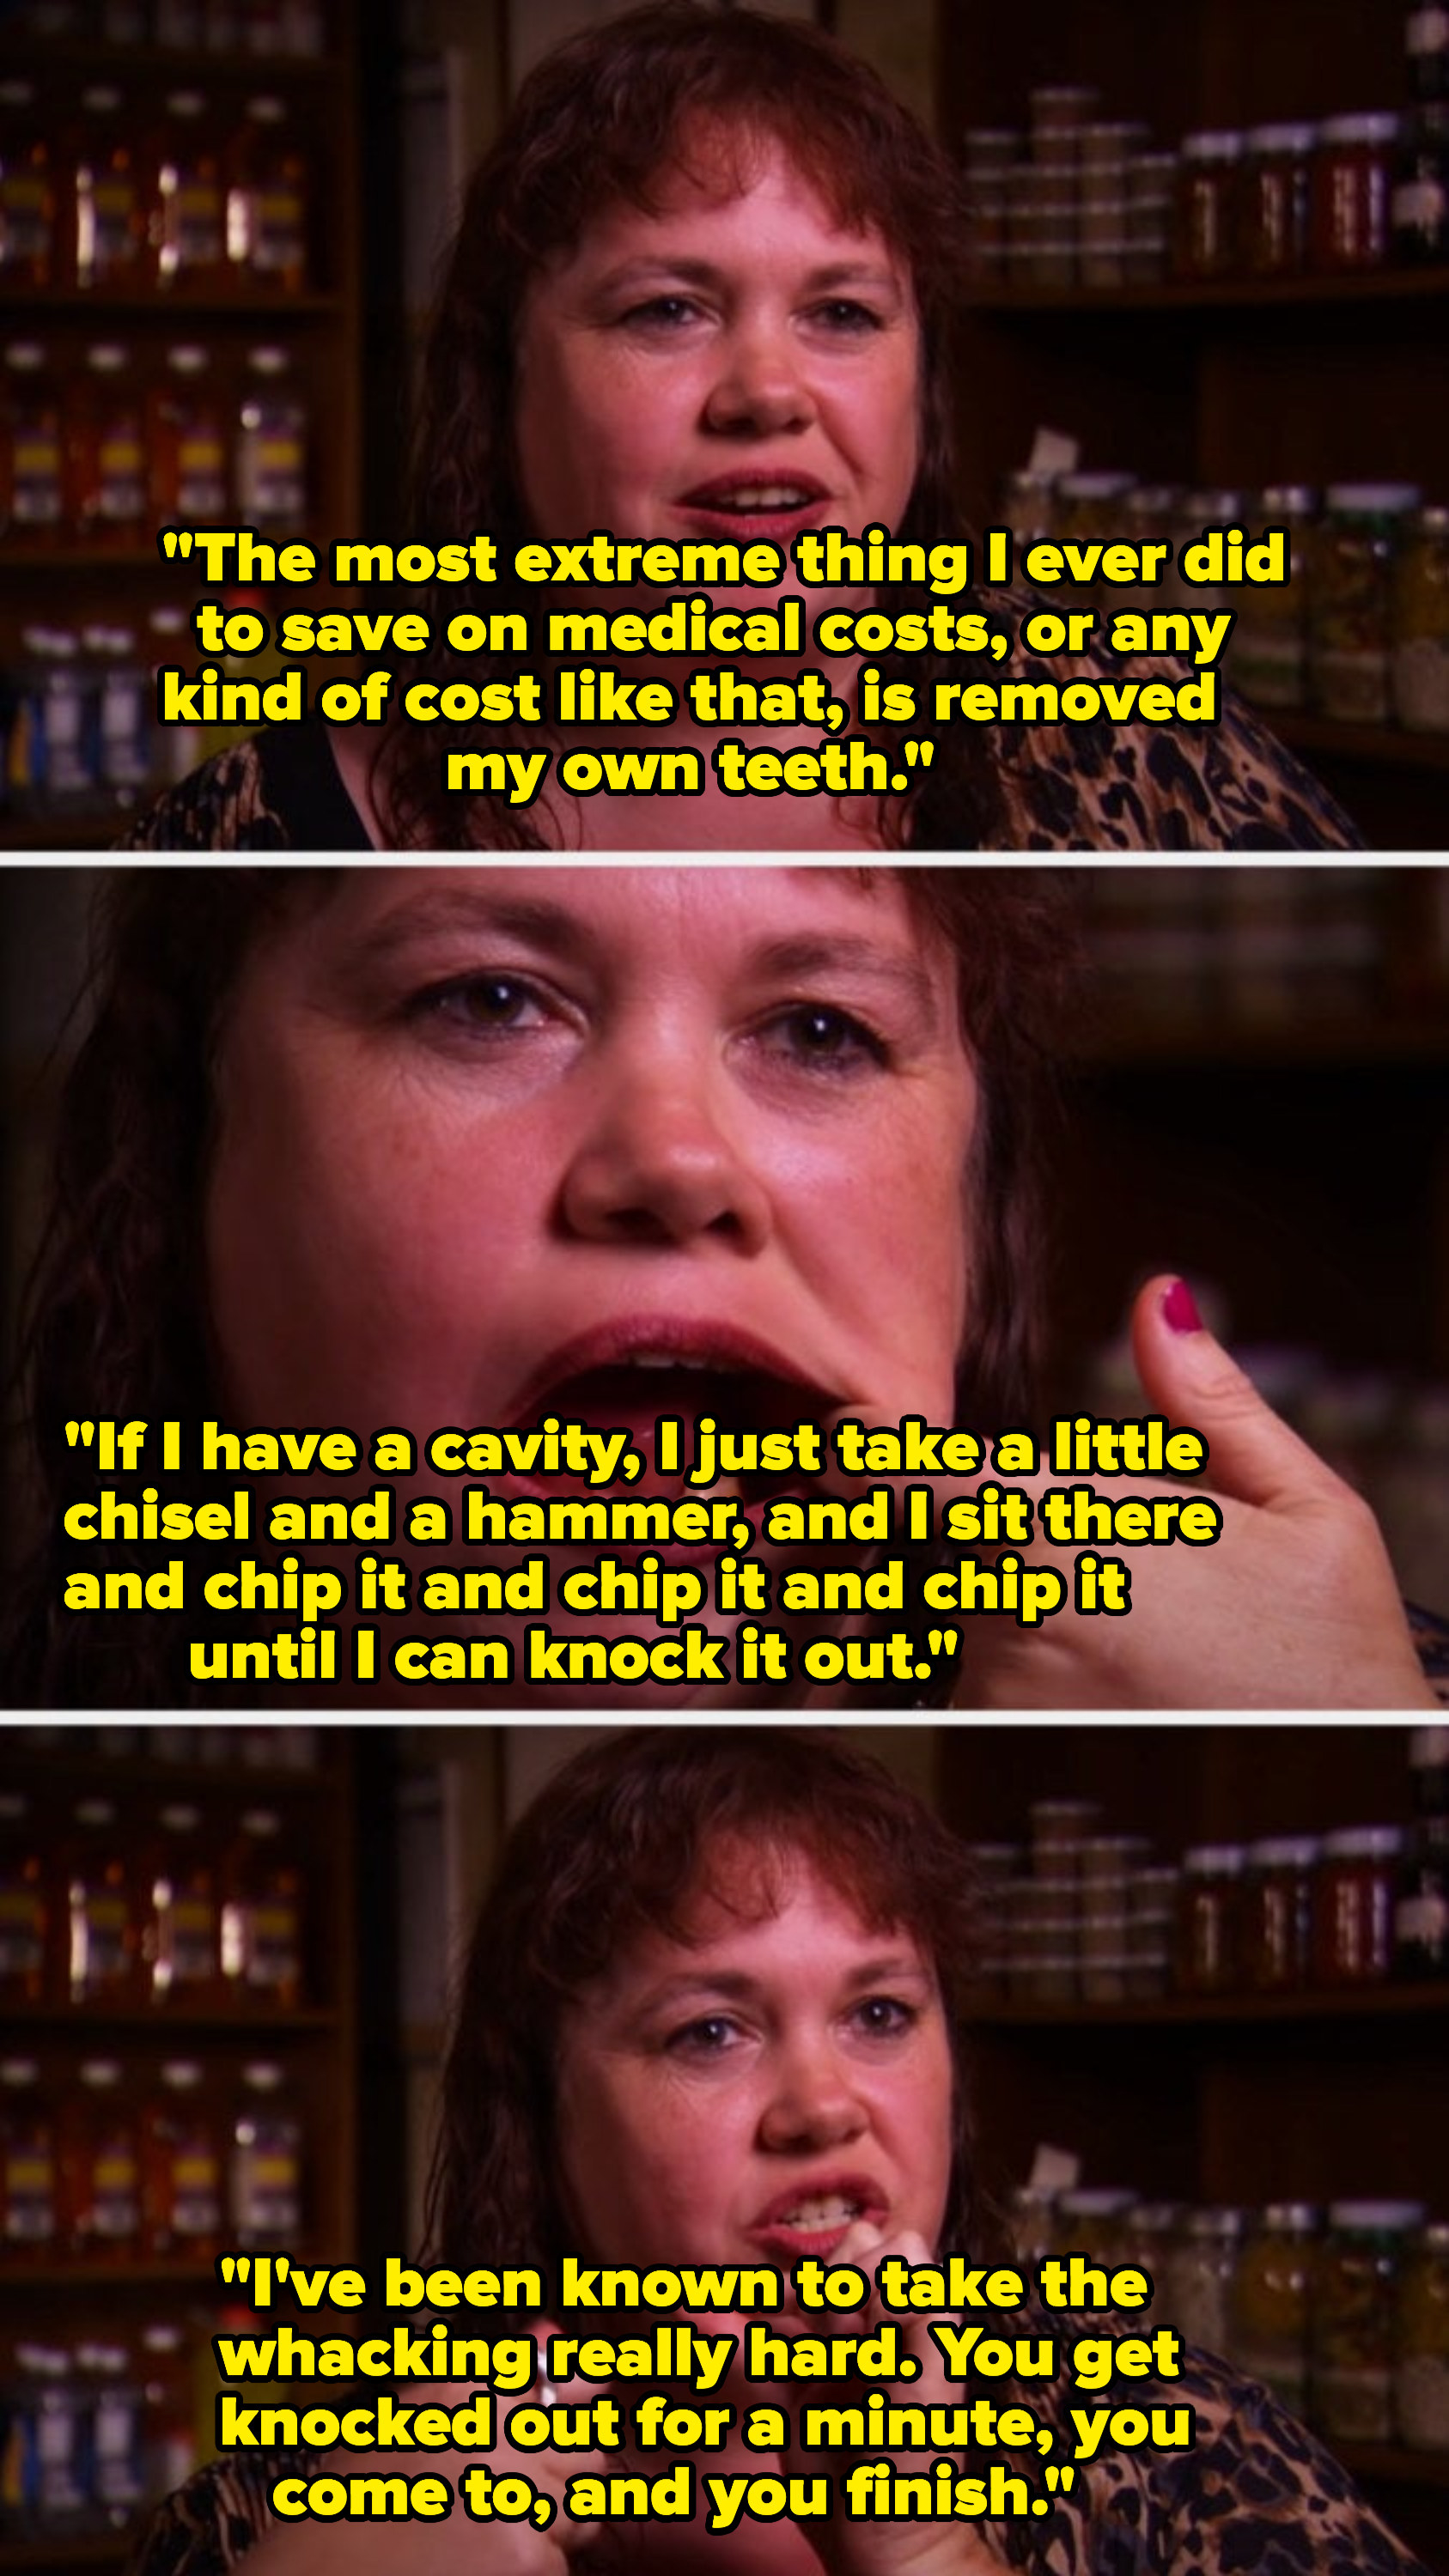 A woman describing how she takes a chisel and a hammer to take her own teeth out when she has a cavity